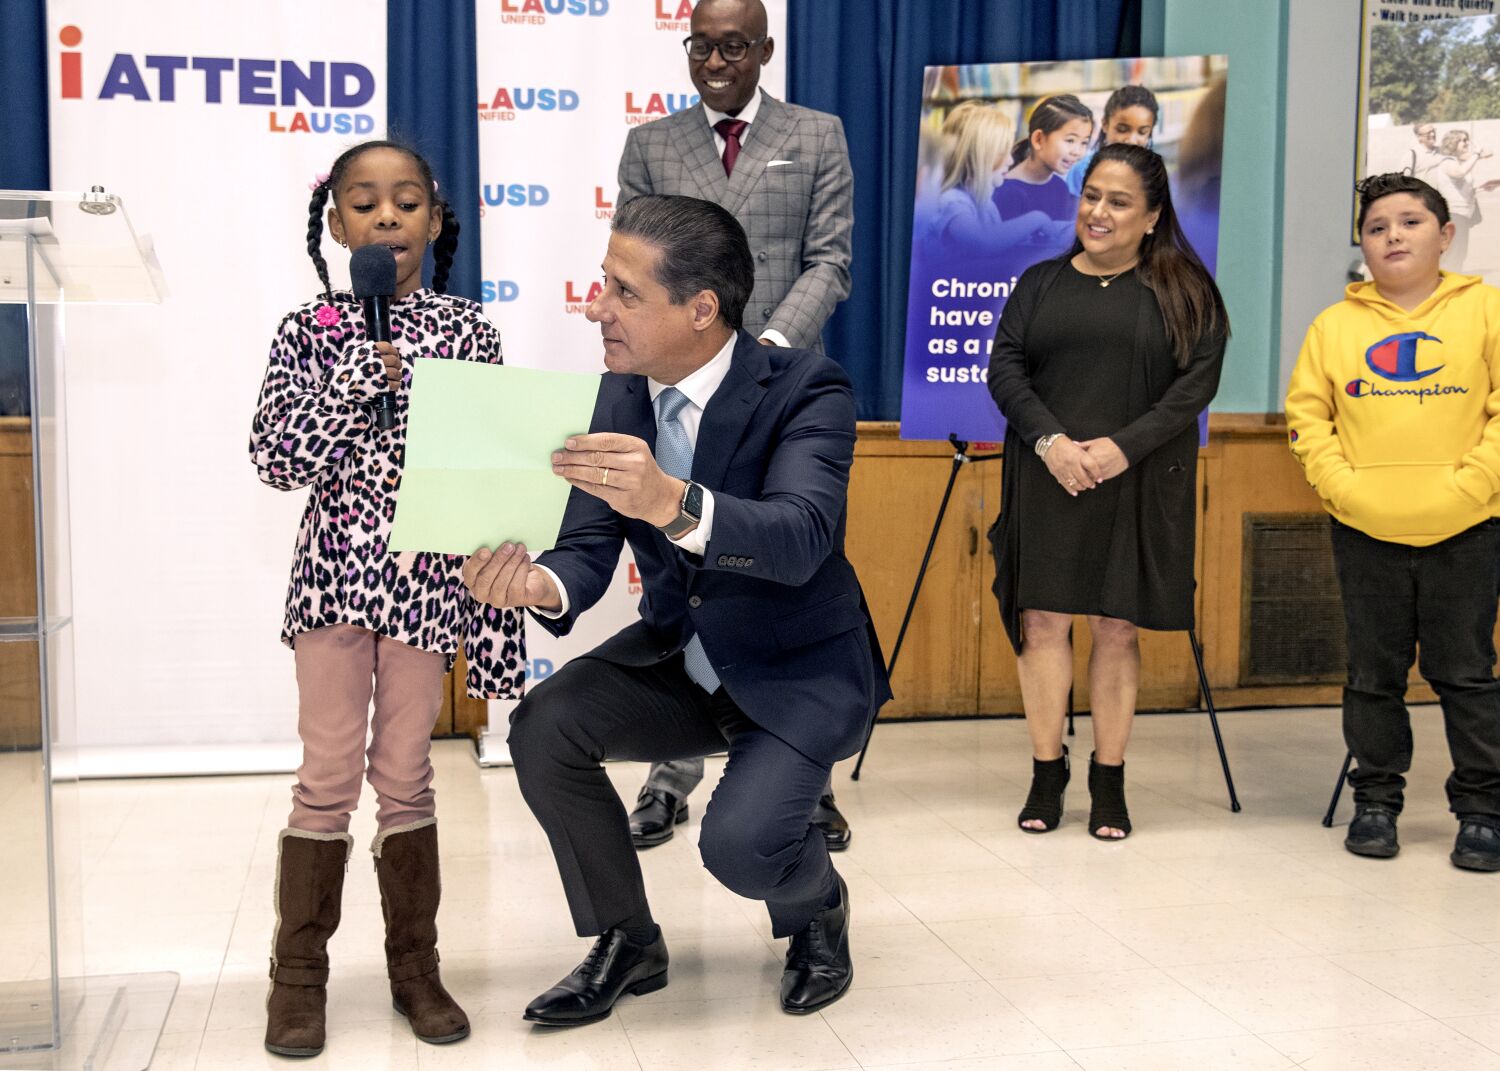 Editorial: Carvalho's first report card as LAUSD superintendent: a few stumbles, but he can do better